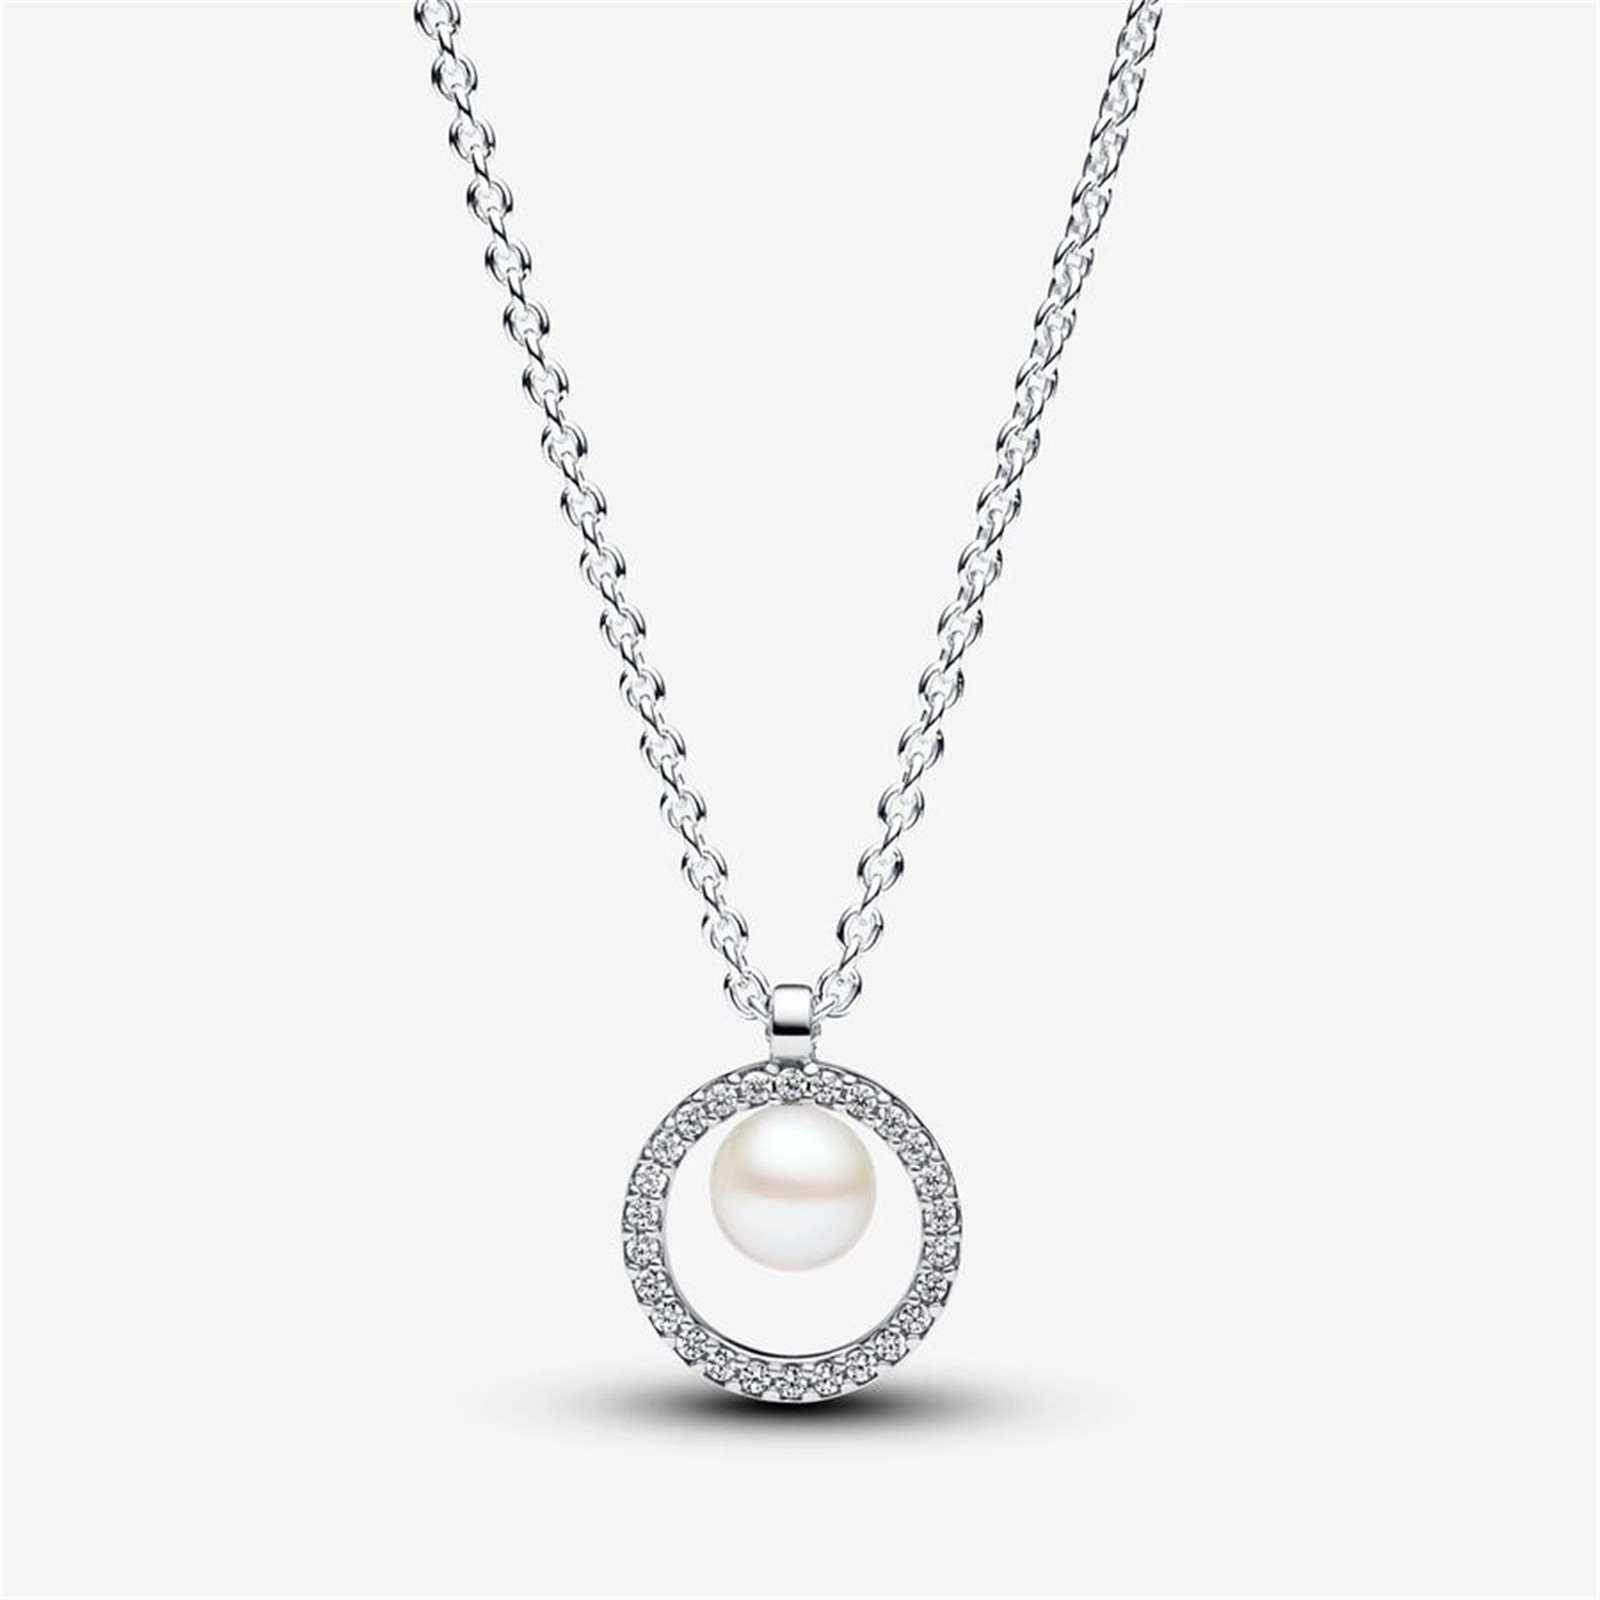 Sterling Silver Pandora Fresh Water Pearl Necklace,Proposal Gift,Gift For Her - $23.99